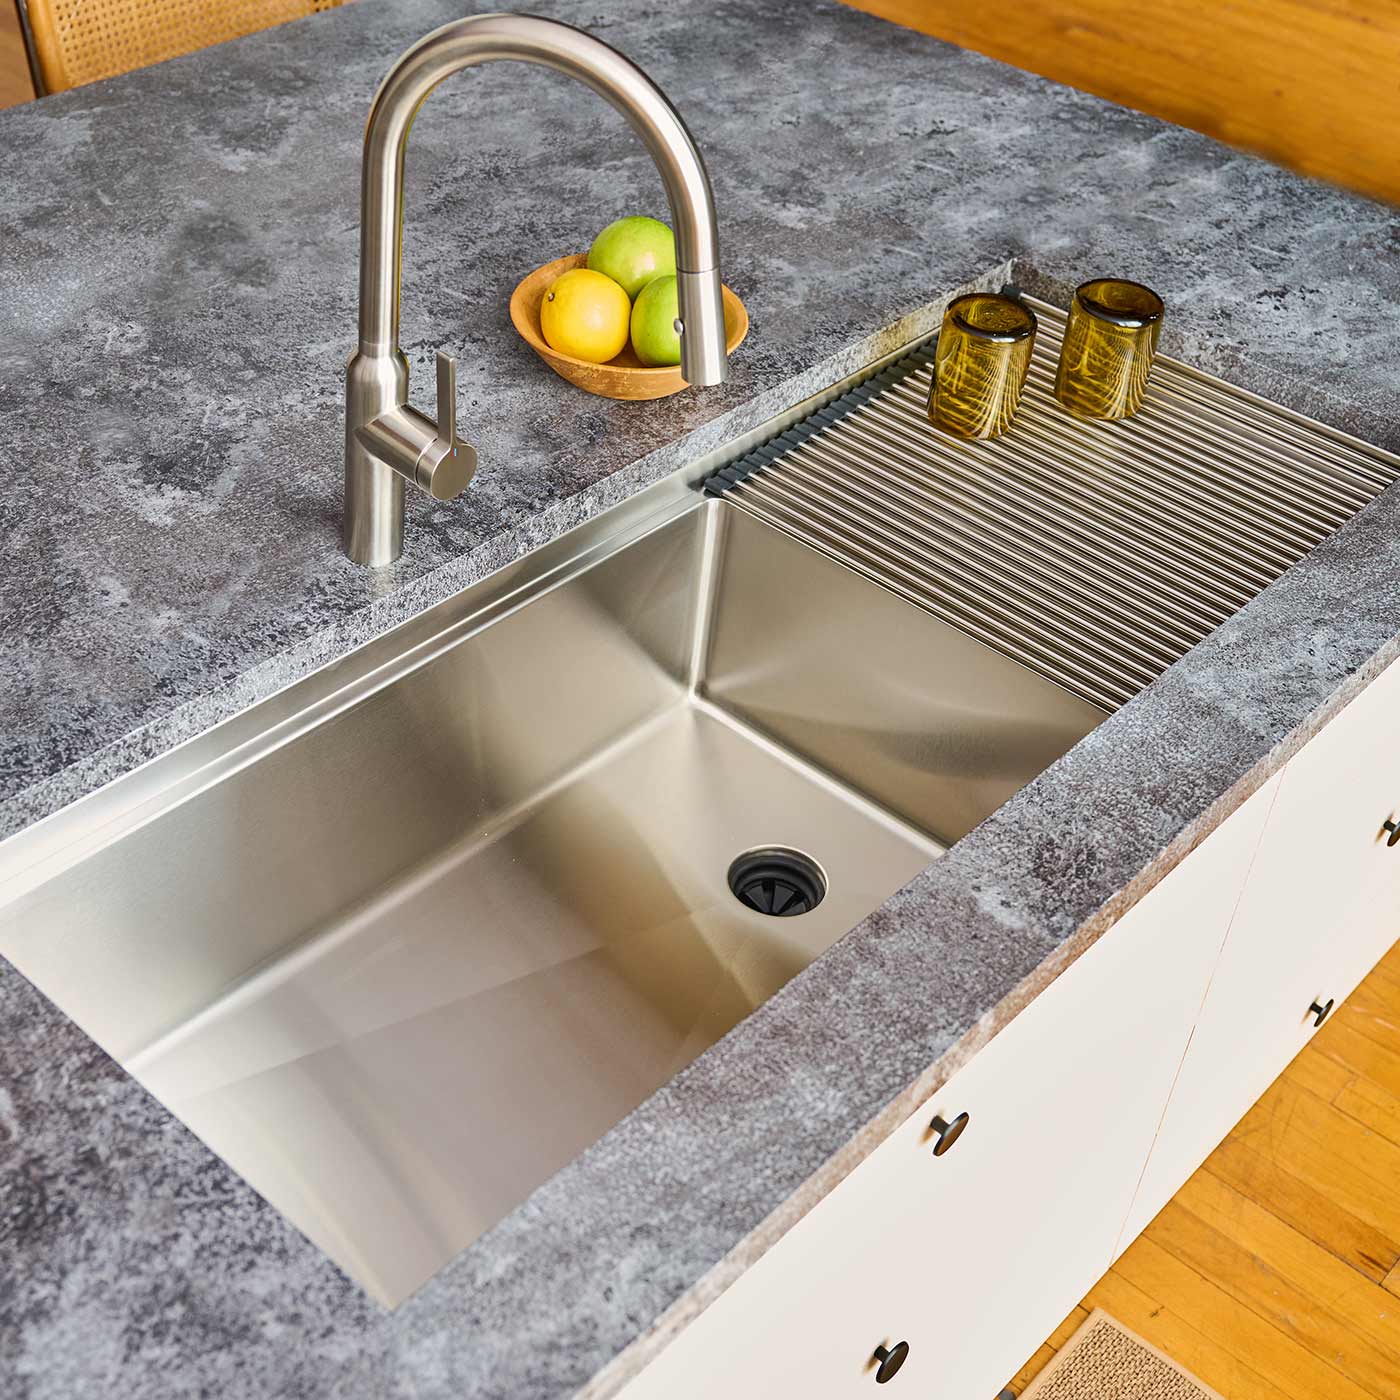 50 inch undermount kitchen sink made with 16 gauge stainless steel single basin workstation sink with drainboard and rollmat